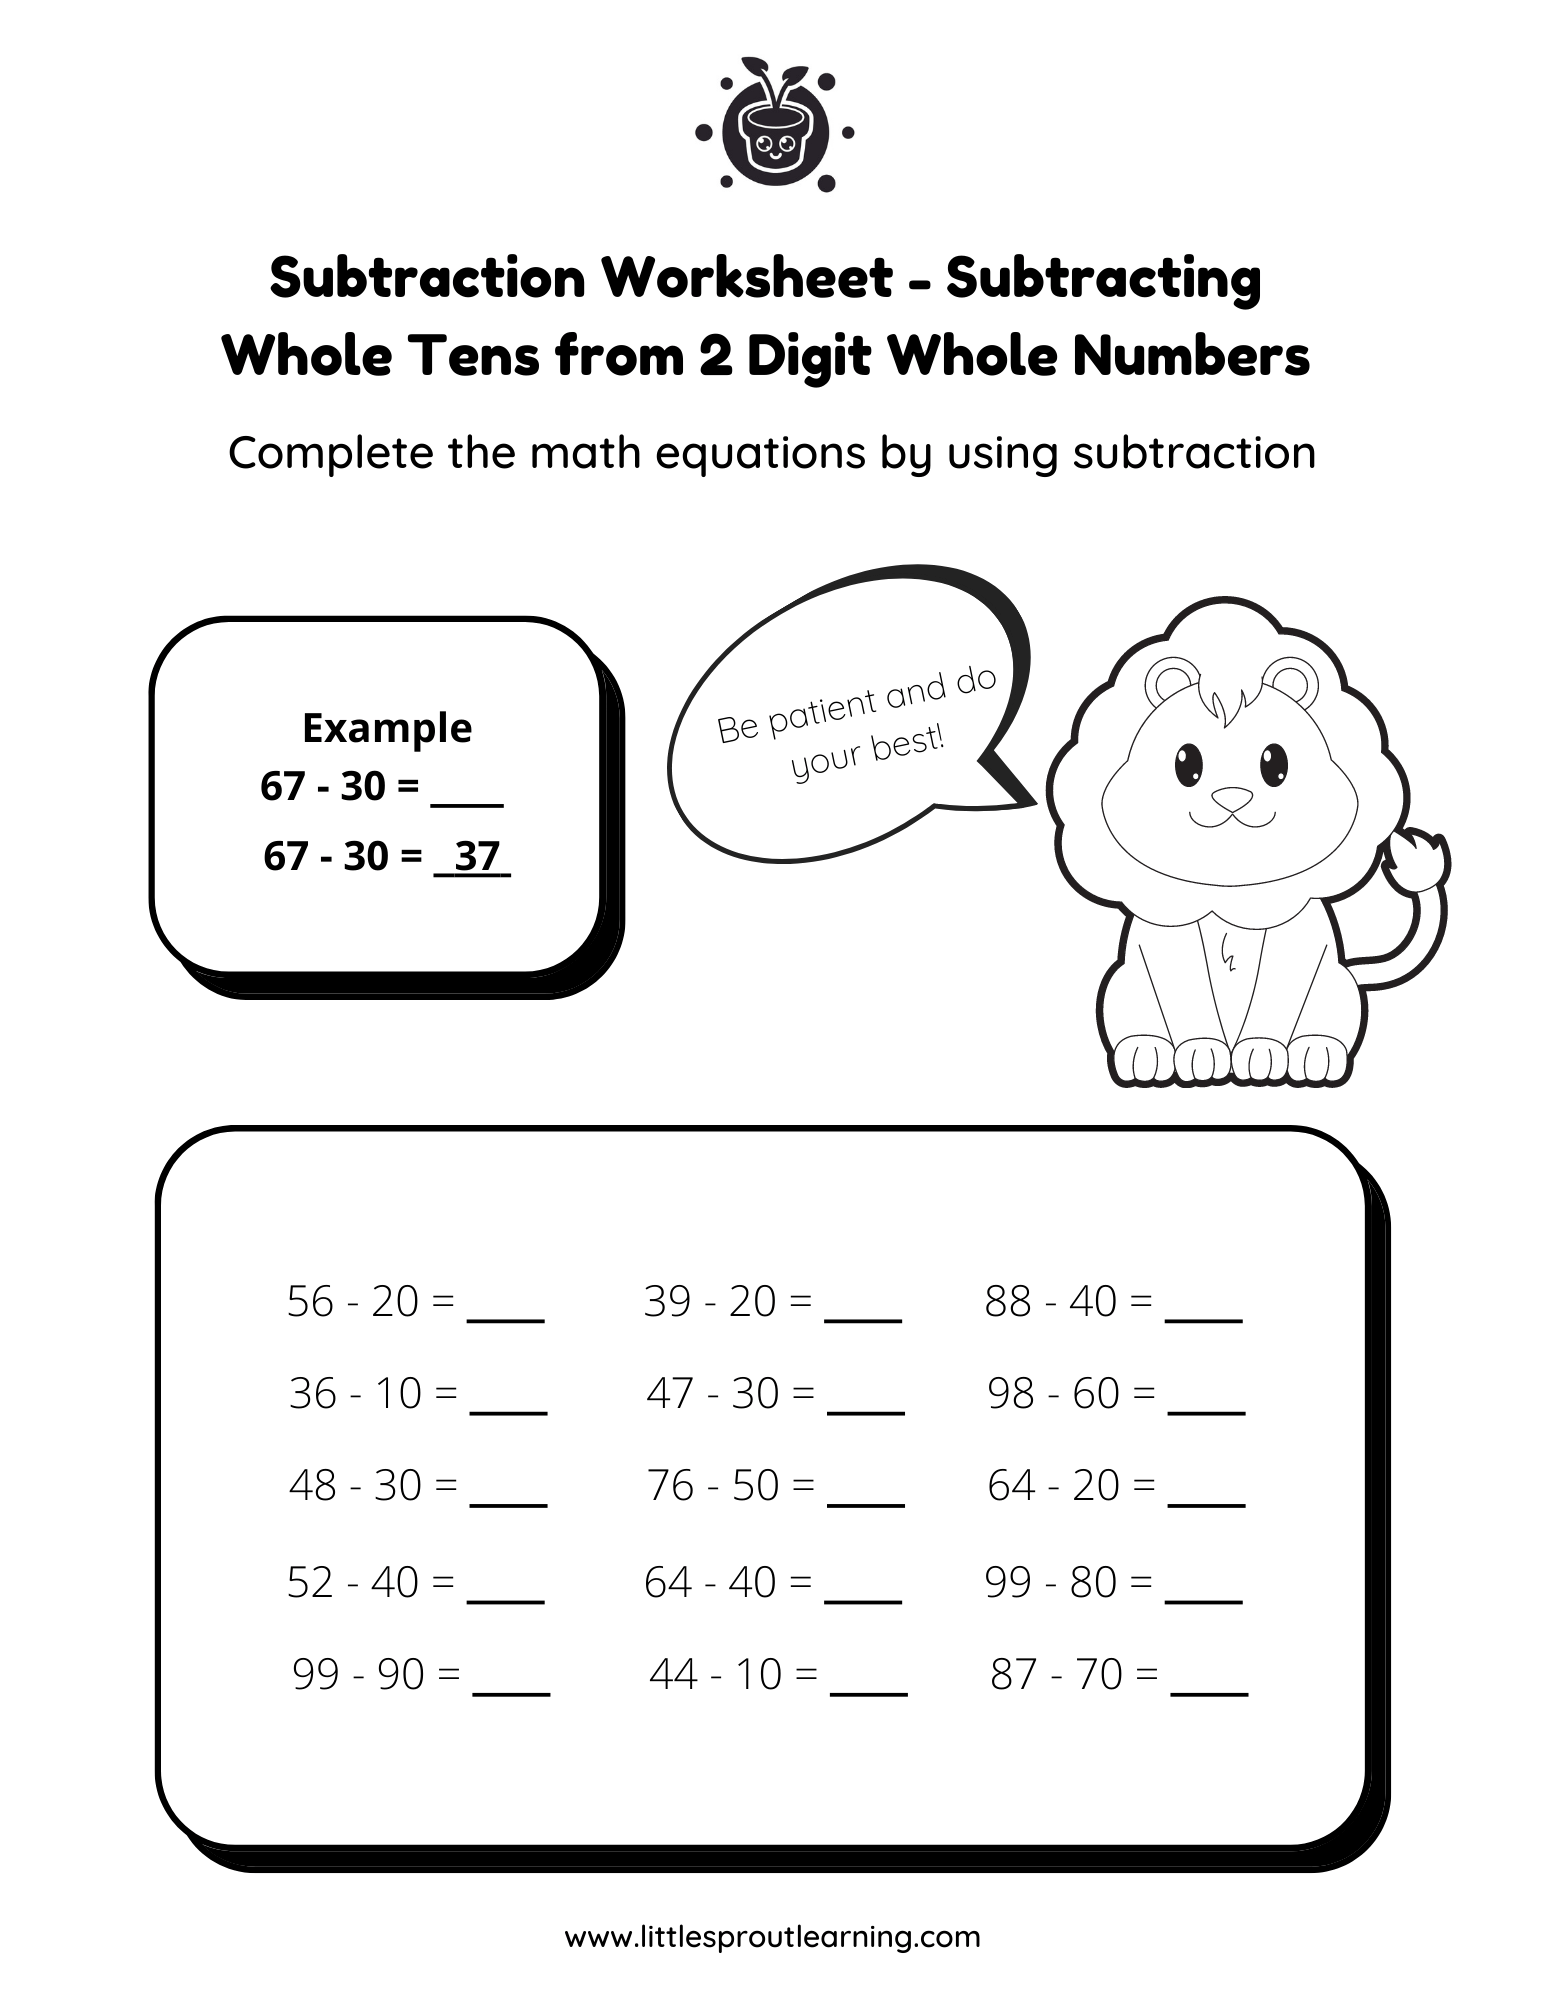 Subtraction Worksheet – Subtracting Whole Tens from 2 Digit Whole Numbers